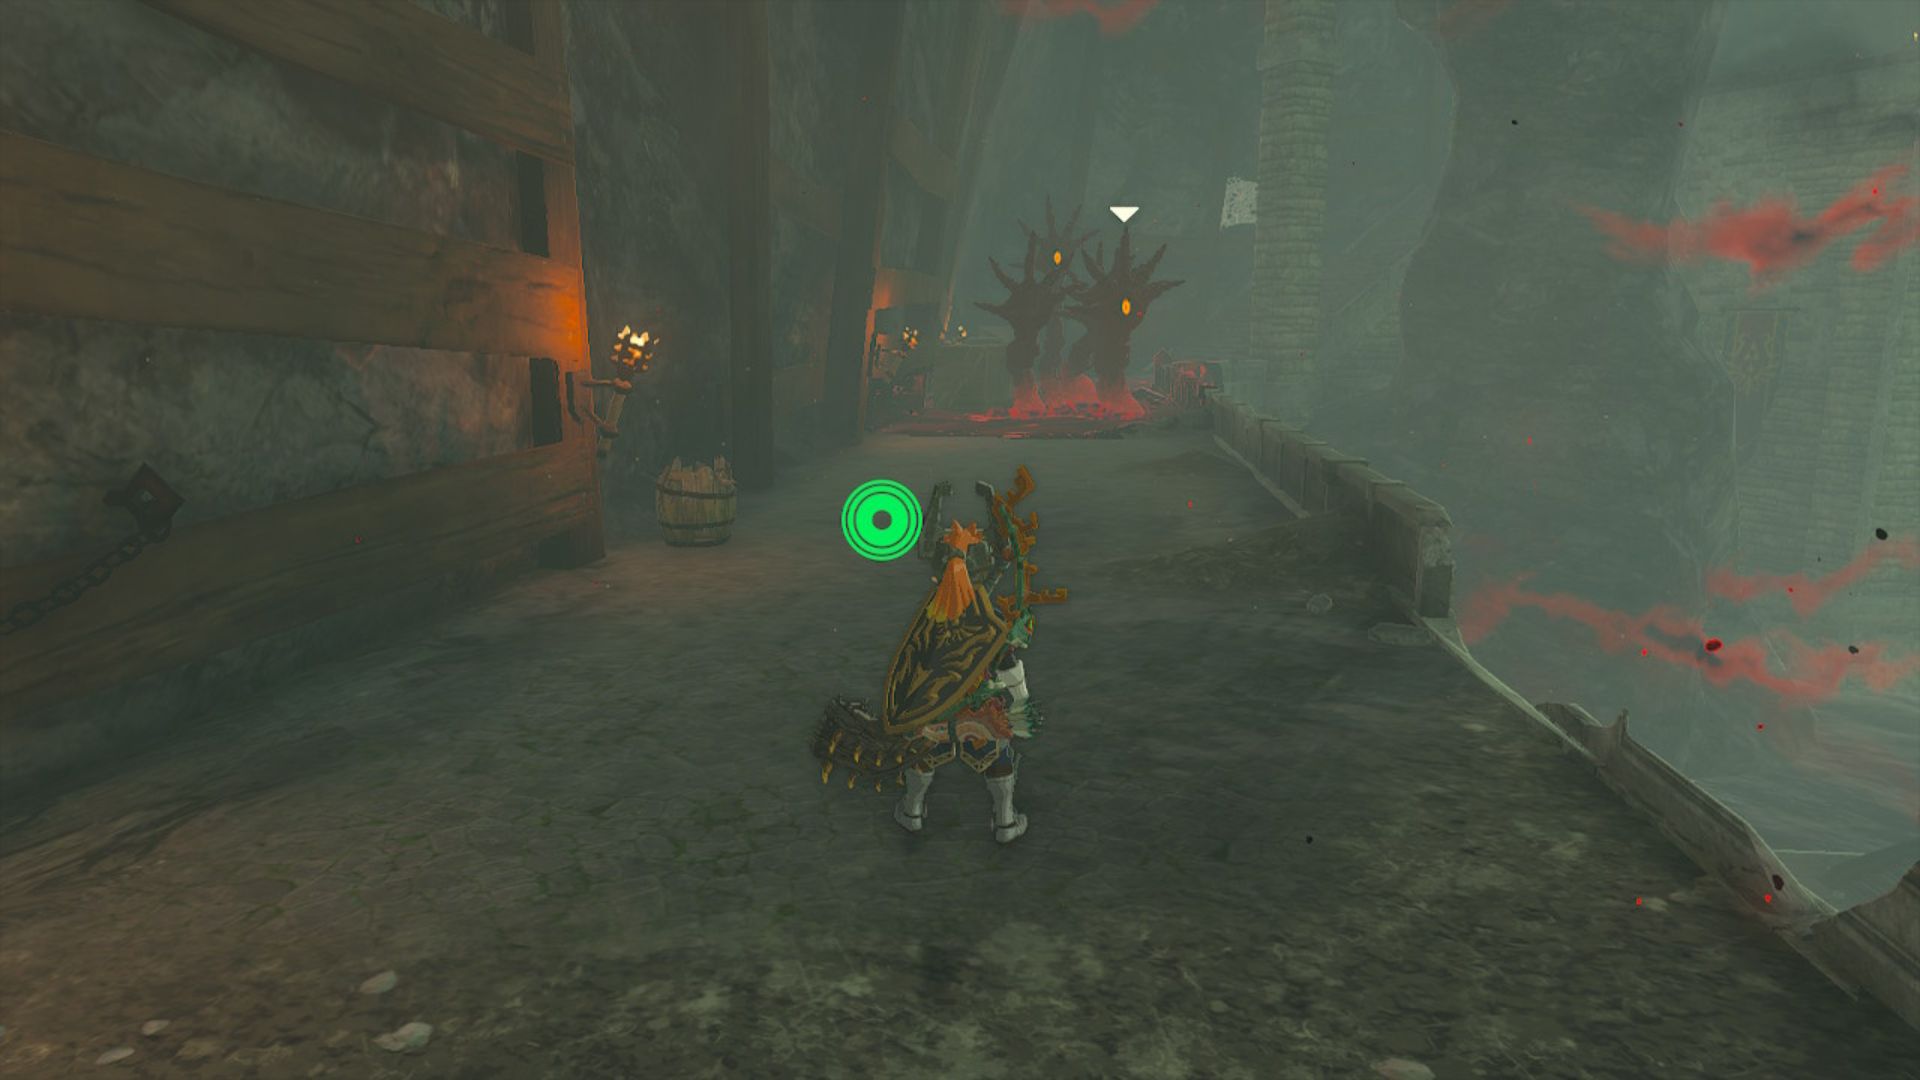 Zelda: Tears of the Kingdom Hylian shield - Link facing off against red hands sticking out the ground with eyes in their palms. They are huge arms, bigger than Link, all happening on a stone platform in a gloomy space.